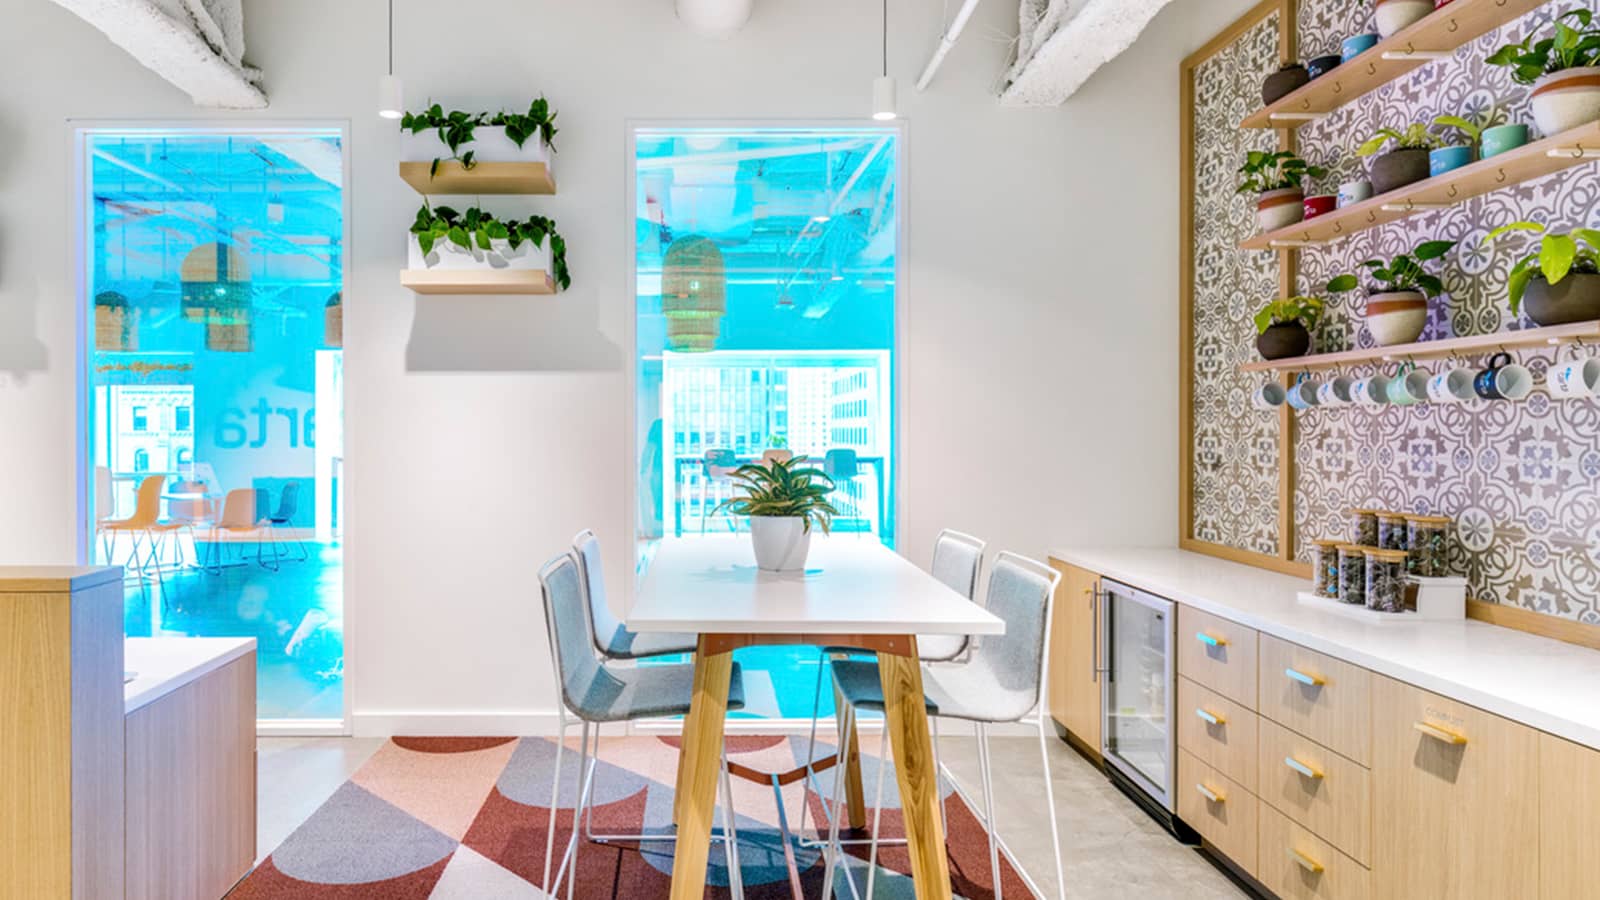 The Cafe Area at Carta's SF Headquarters